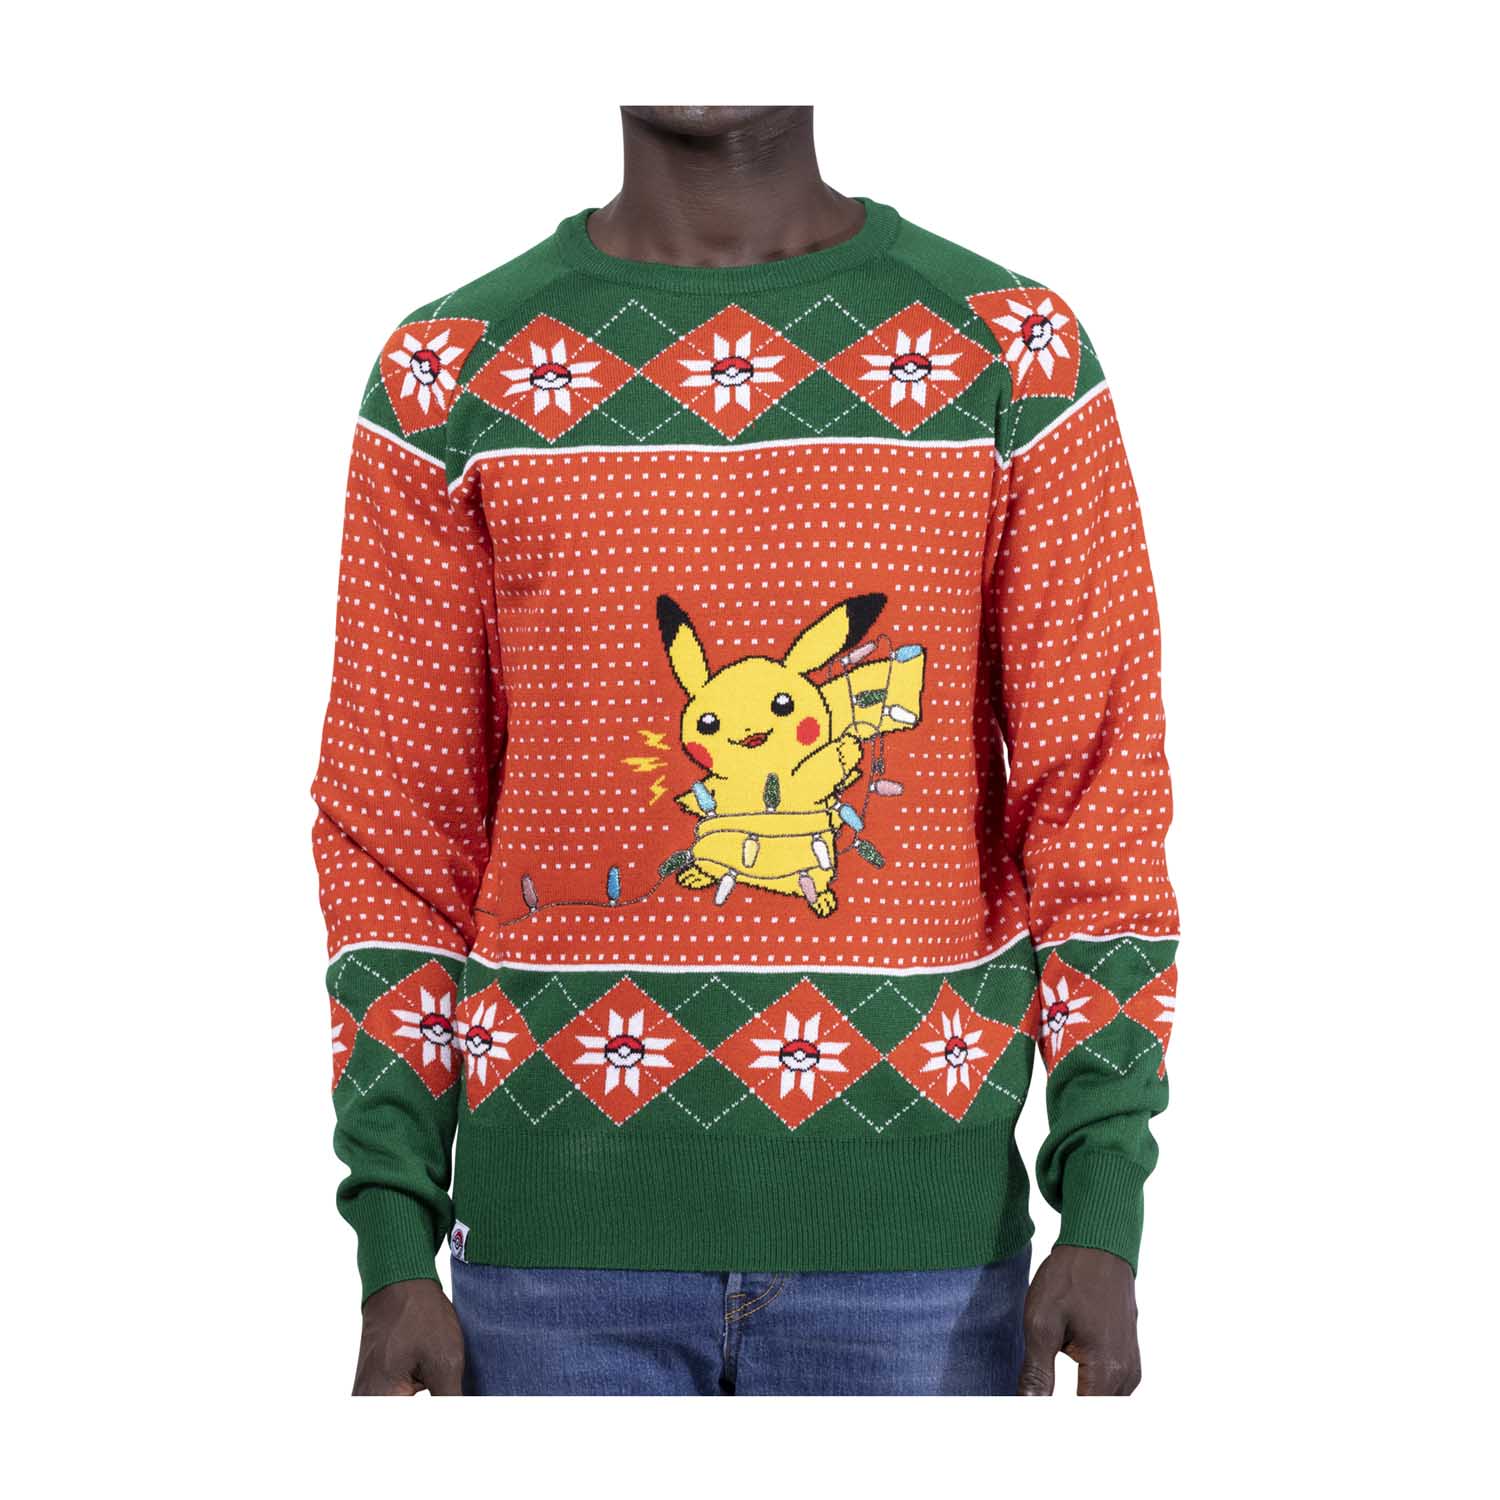 Pokémon Center North America's Holiday 2021 Collection now 